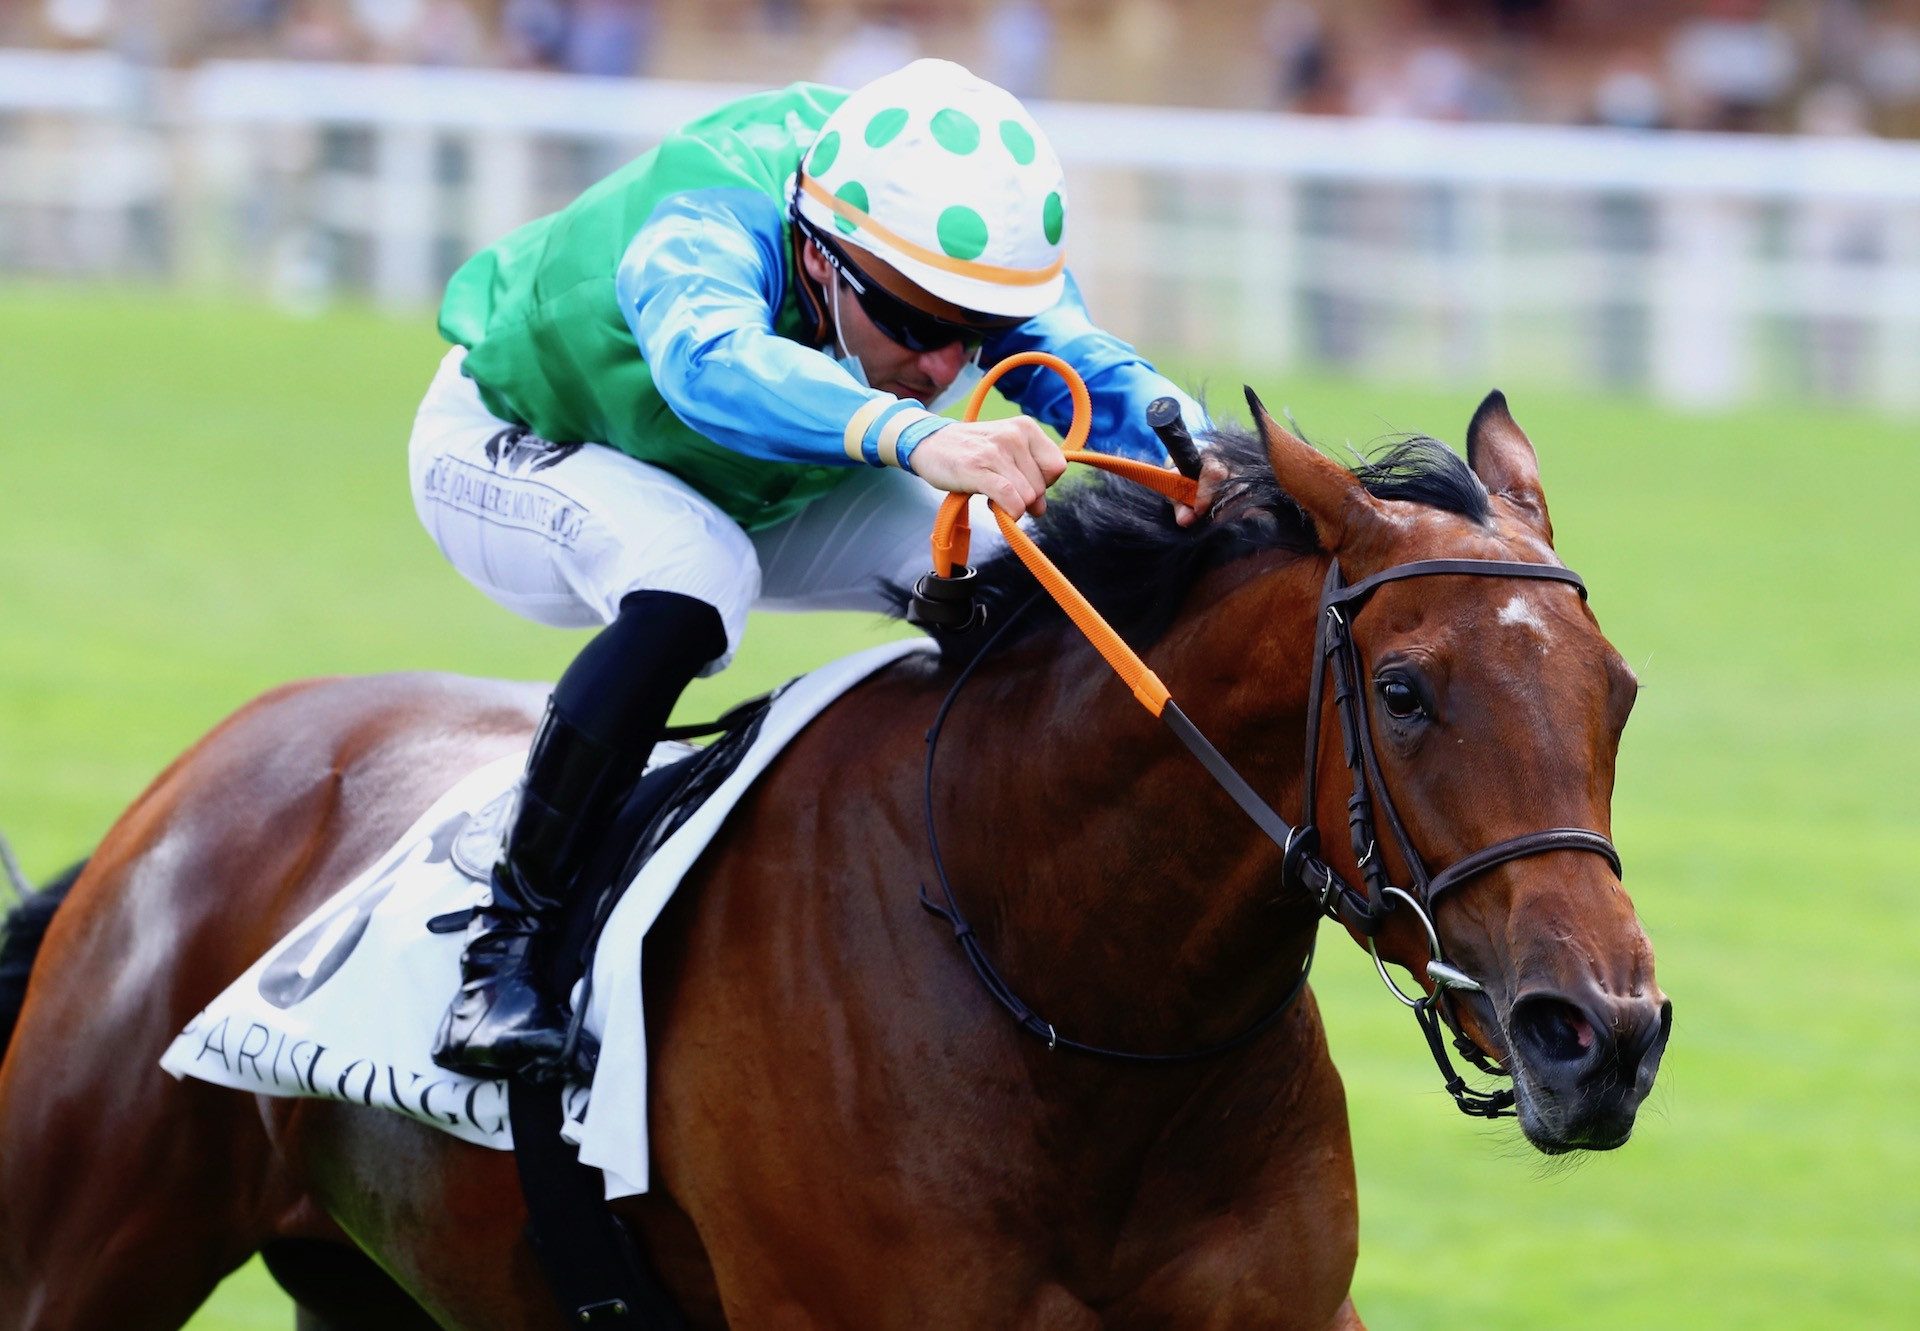 Kings Harlequin (Camelot) Wins The Listed Prix Roland De Chambure at Longchamp